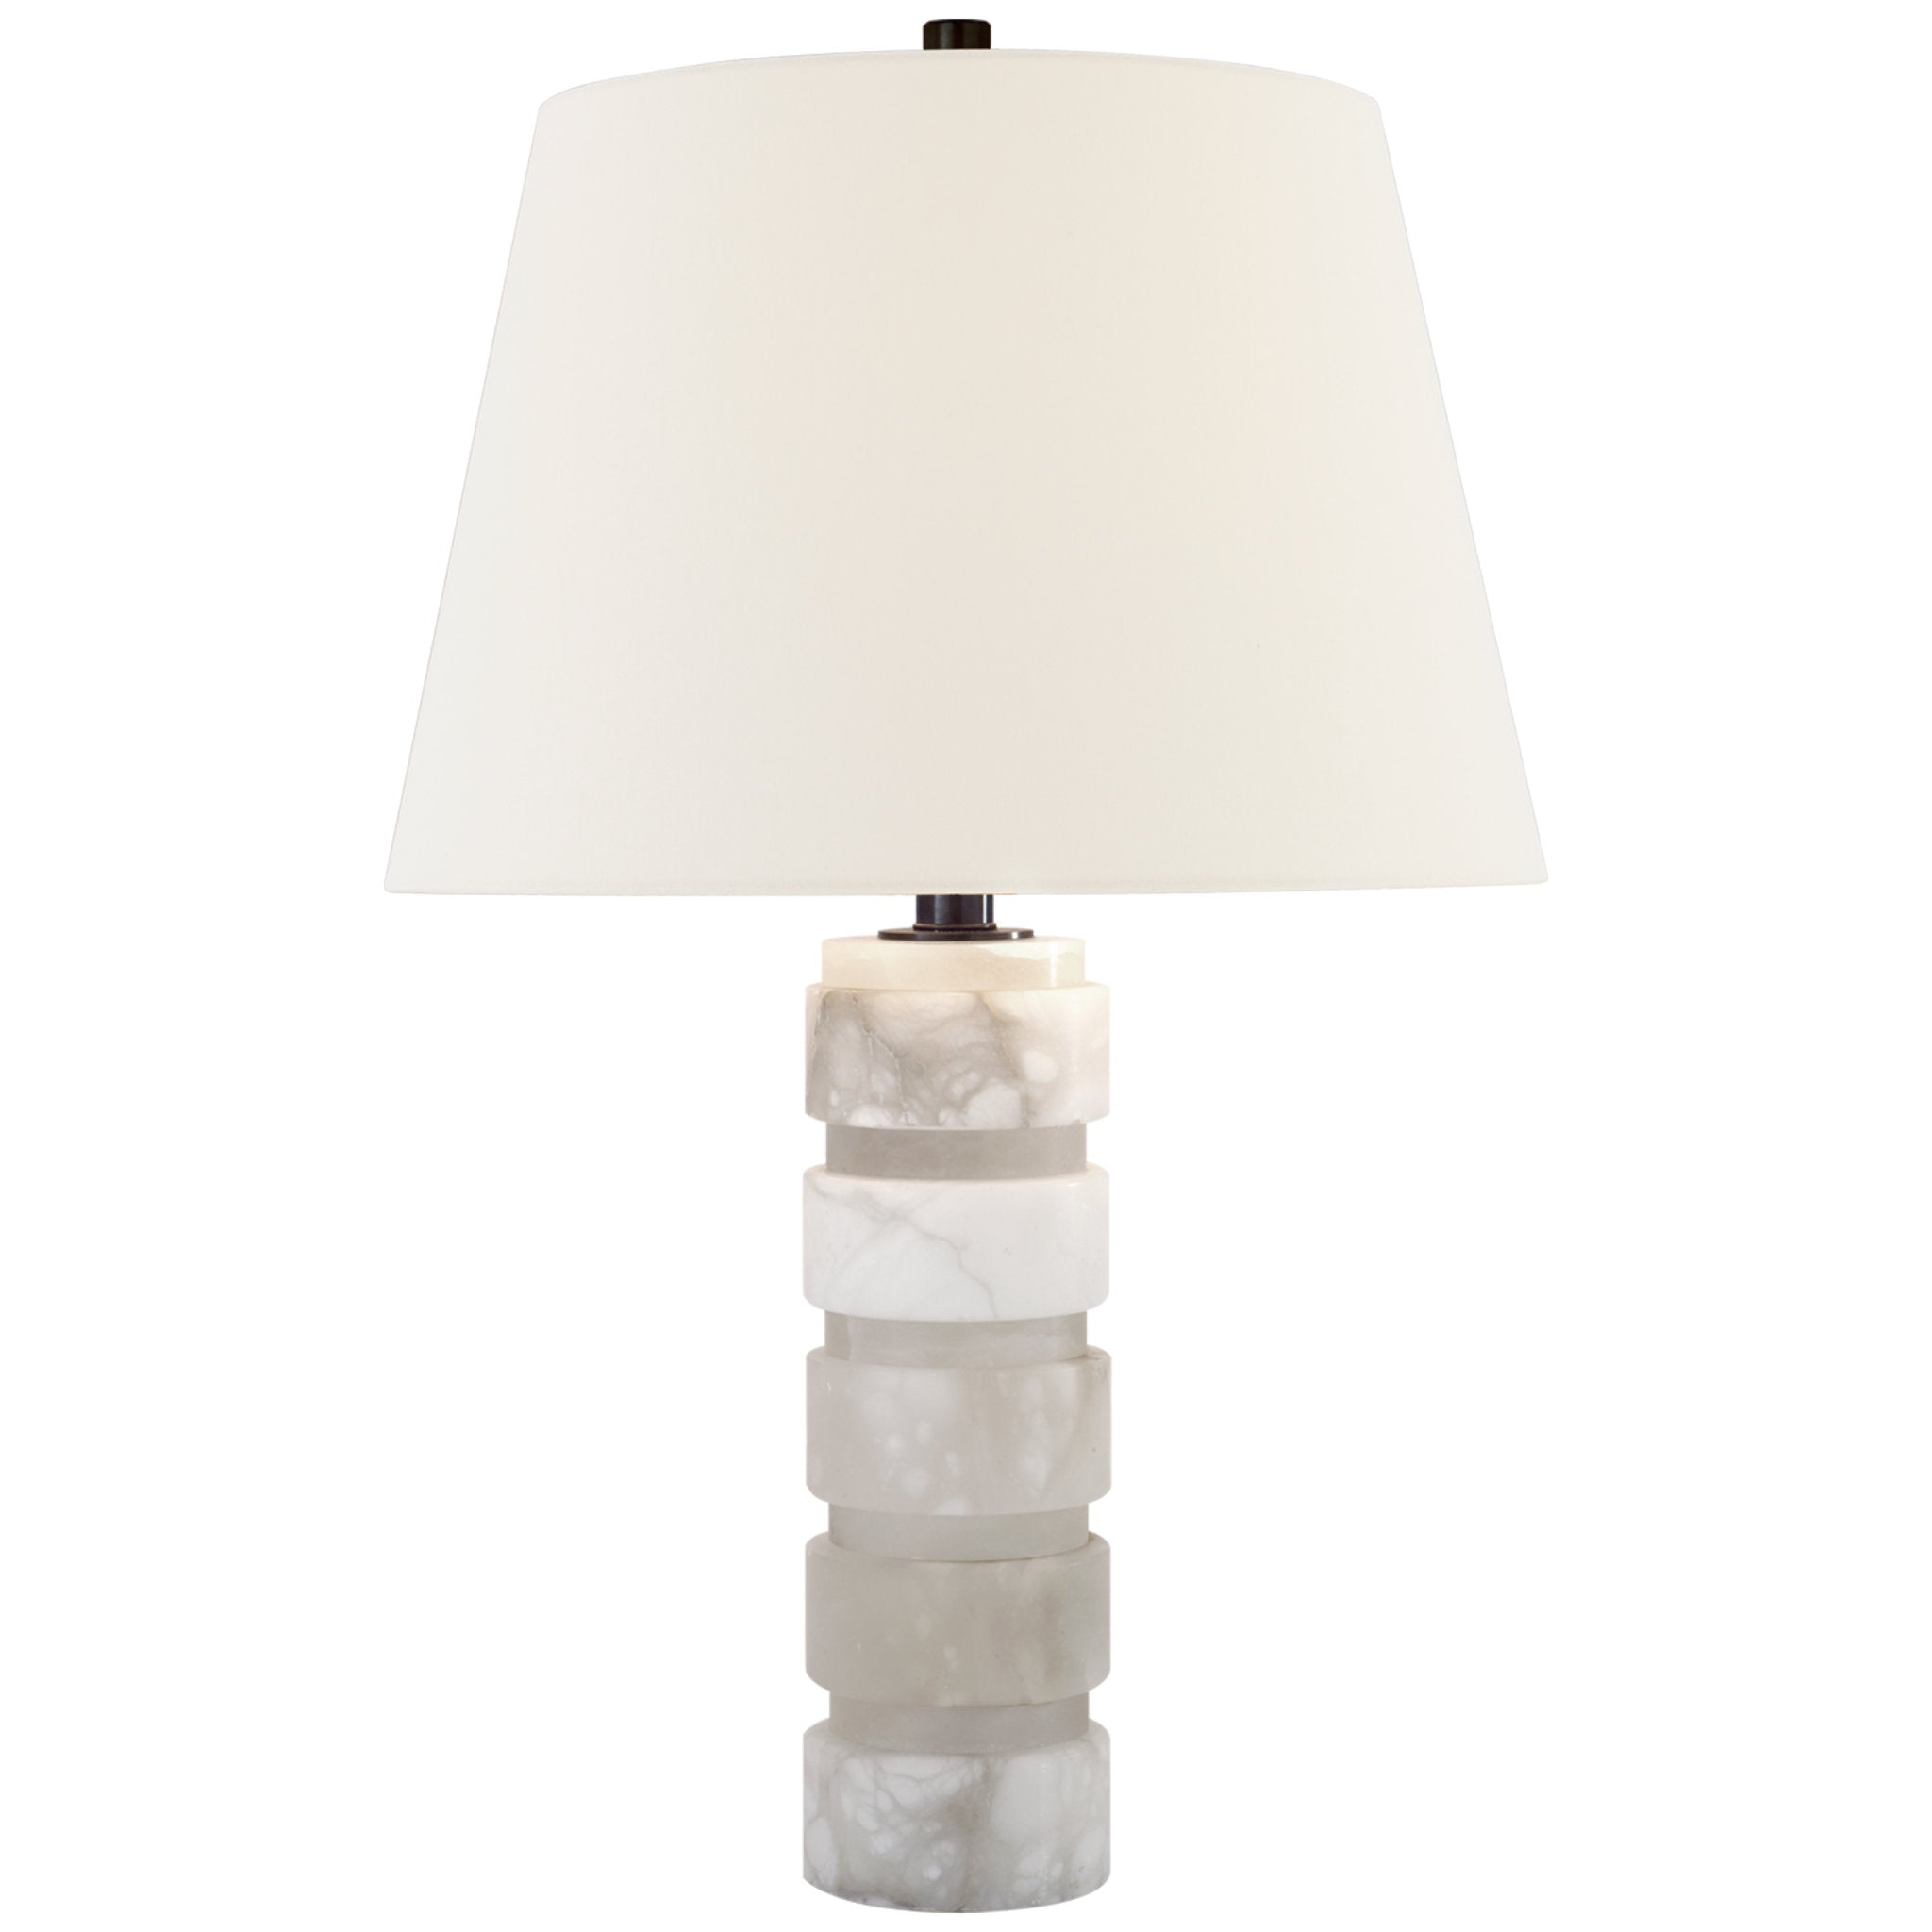 Chapman & Myers Round Chunky Stacked Table Lamp in Alabaster with Linen Shade